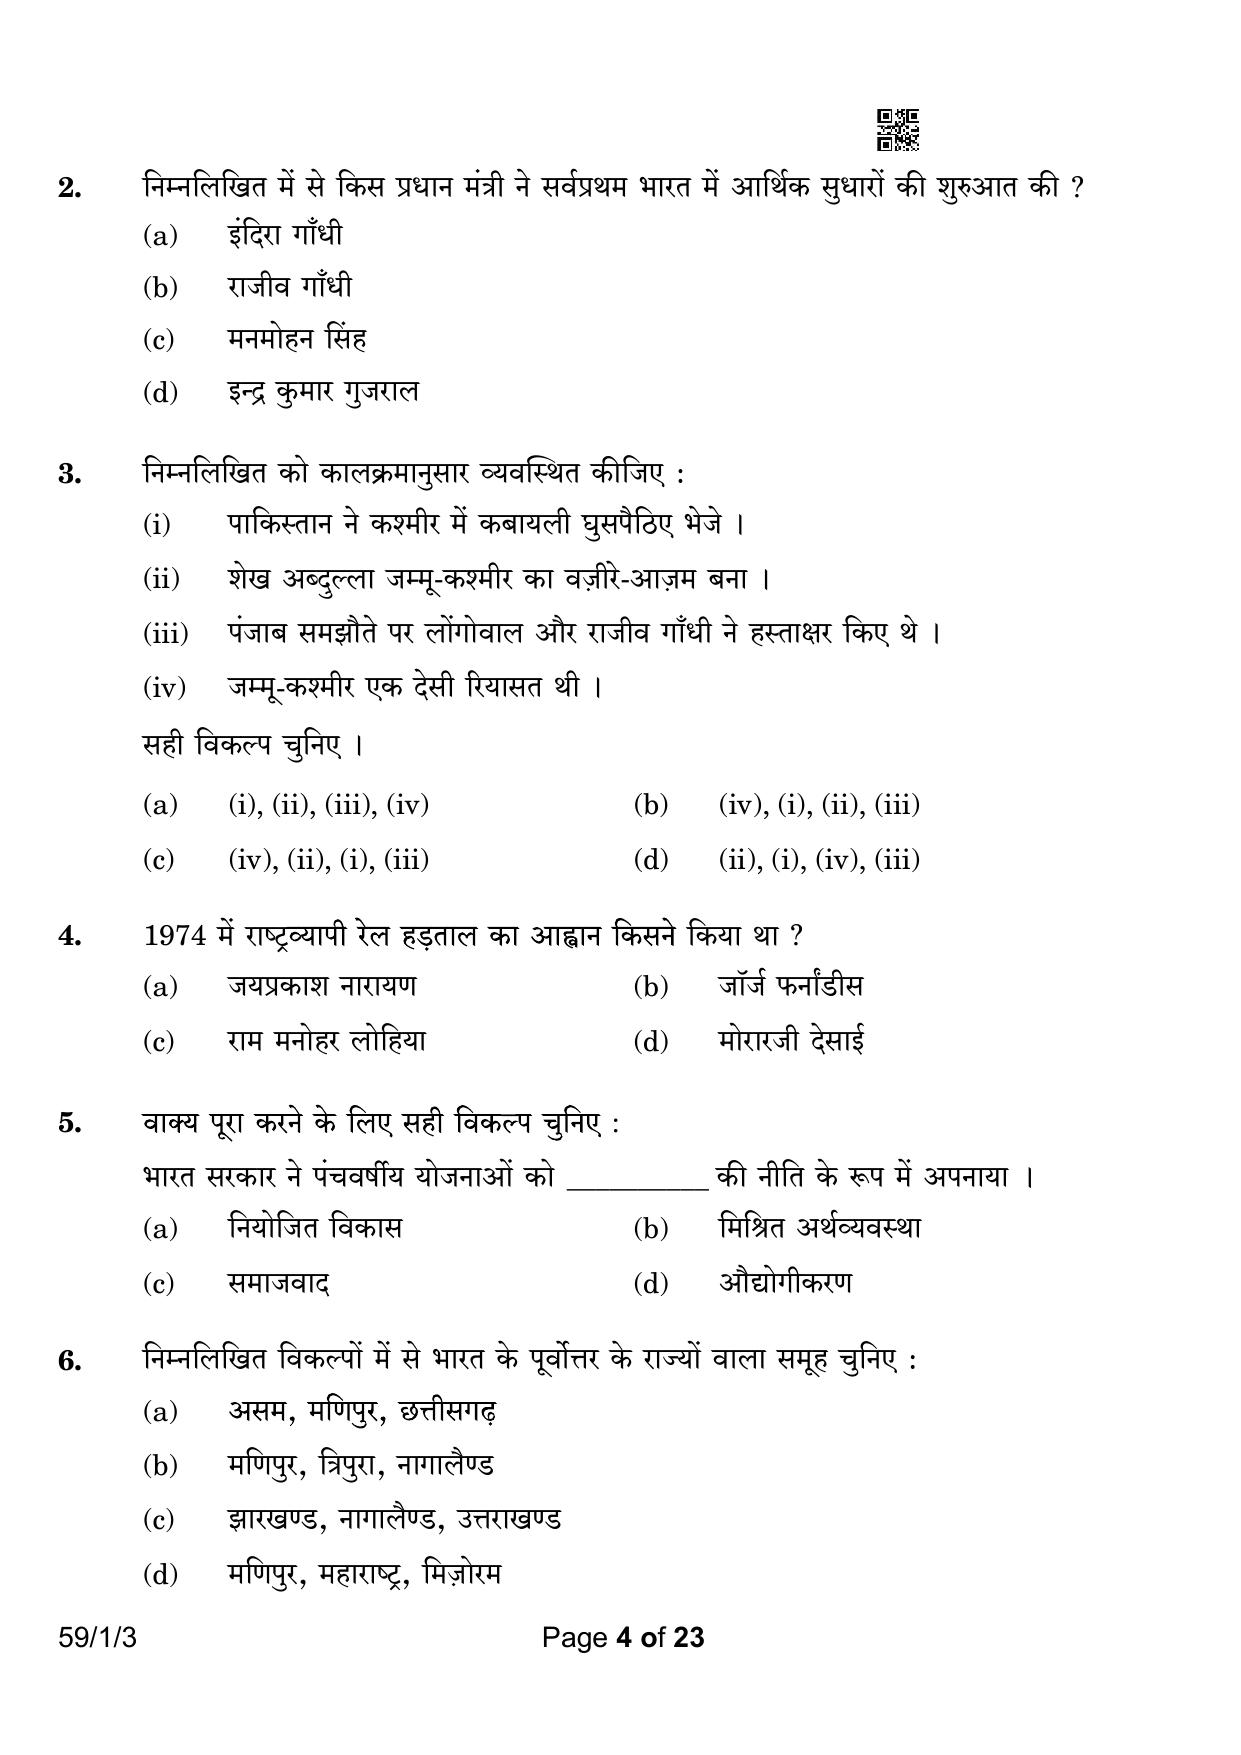 CBSE Class 12 59-1-3 Political Science 2023 Question Paper - Page 4